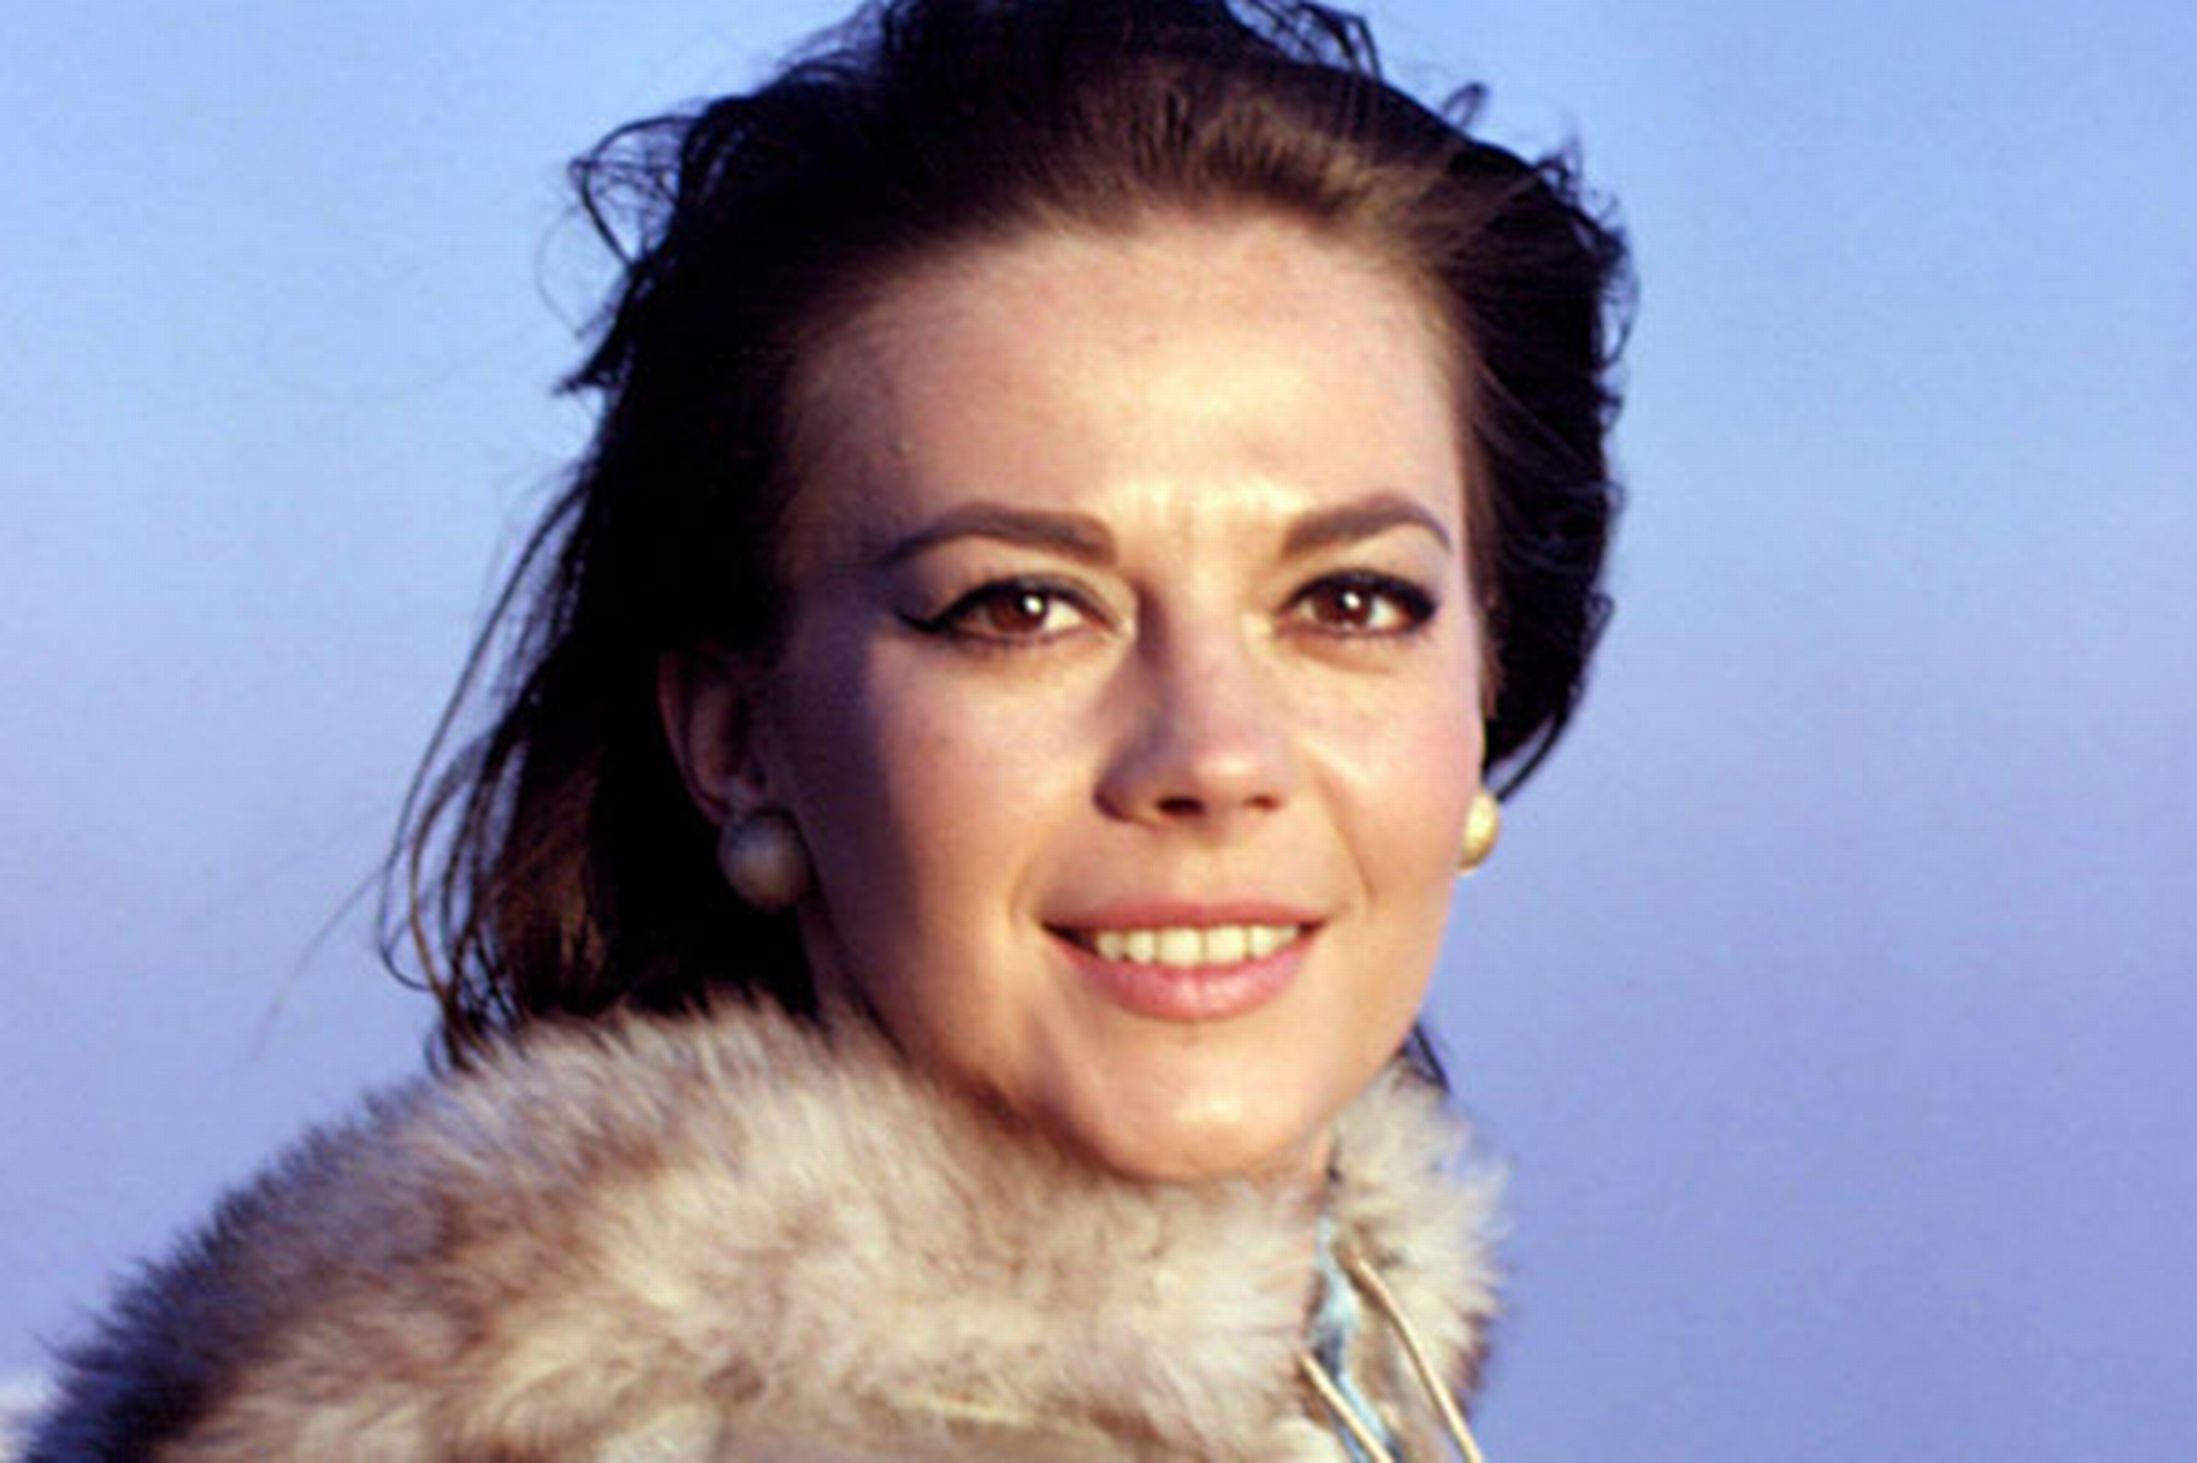 More Pictures Of Natalie Wood. natalie wood images. 